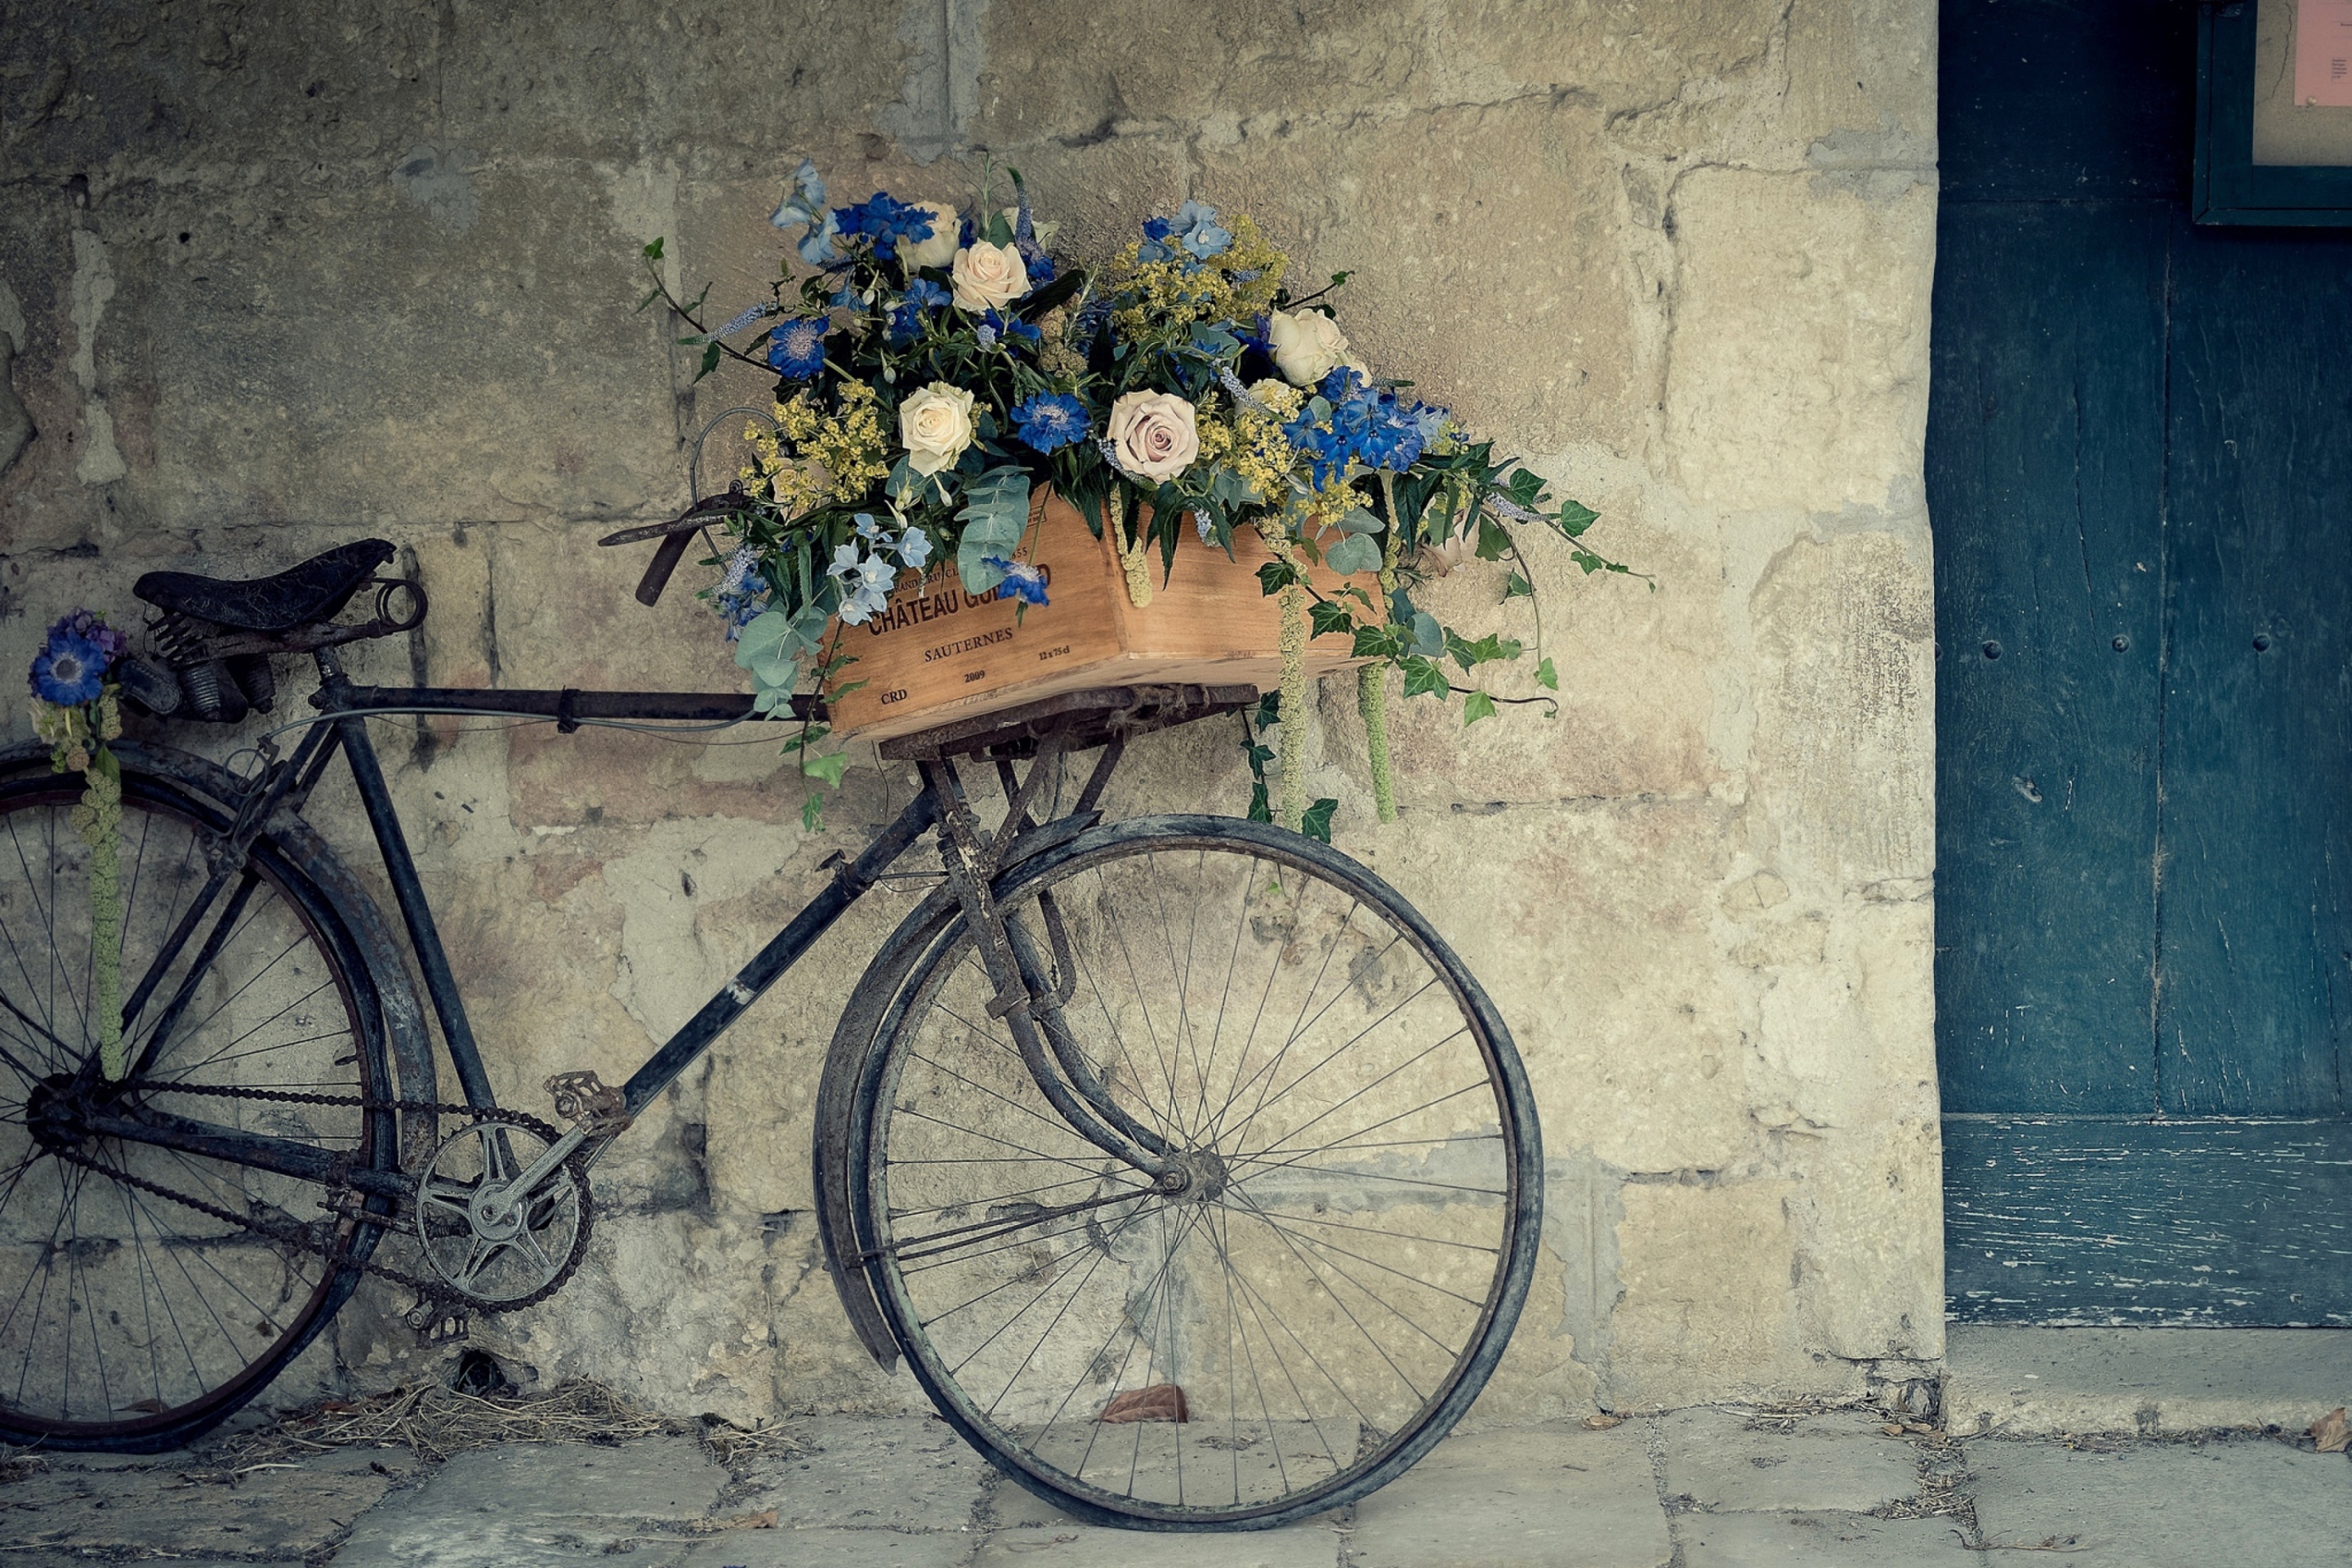 Fondo de pantalla Bicycle With Basket Full Of Flowers 2880x1920